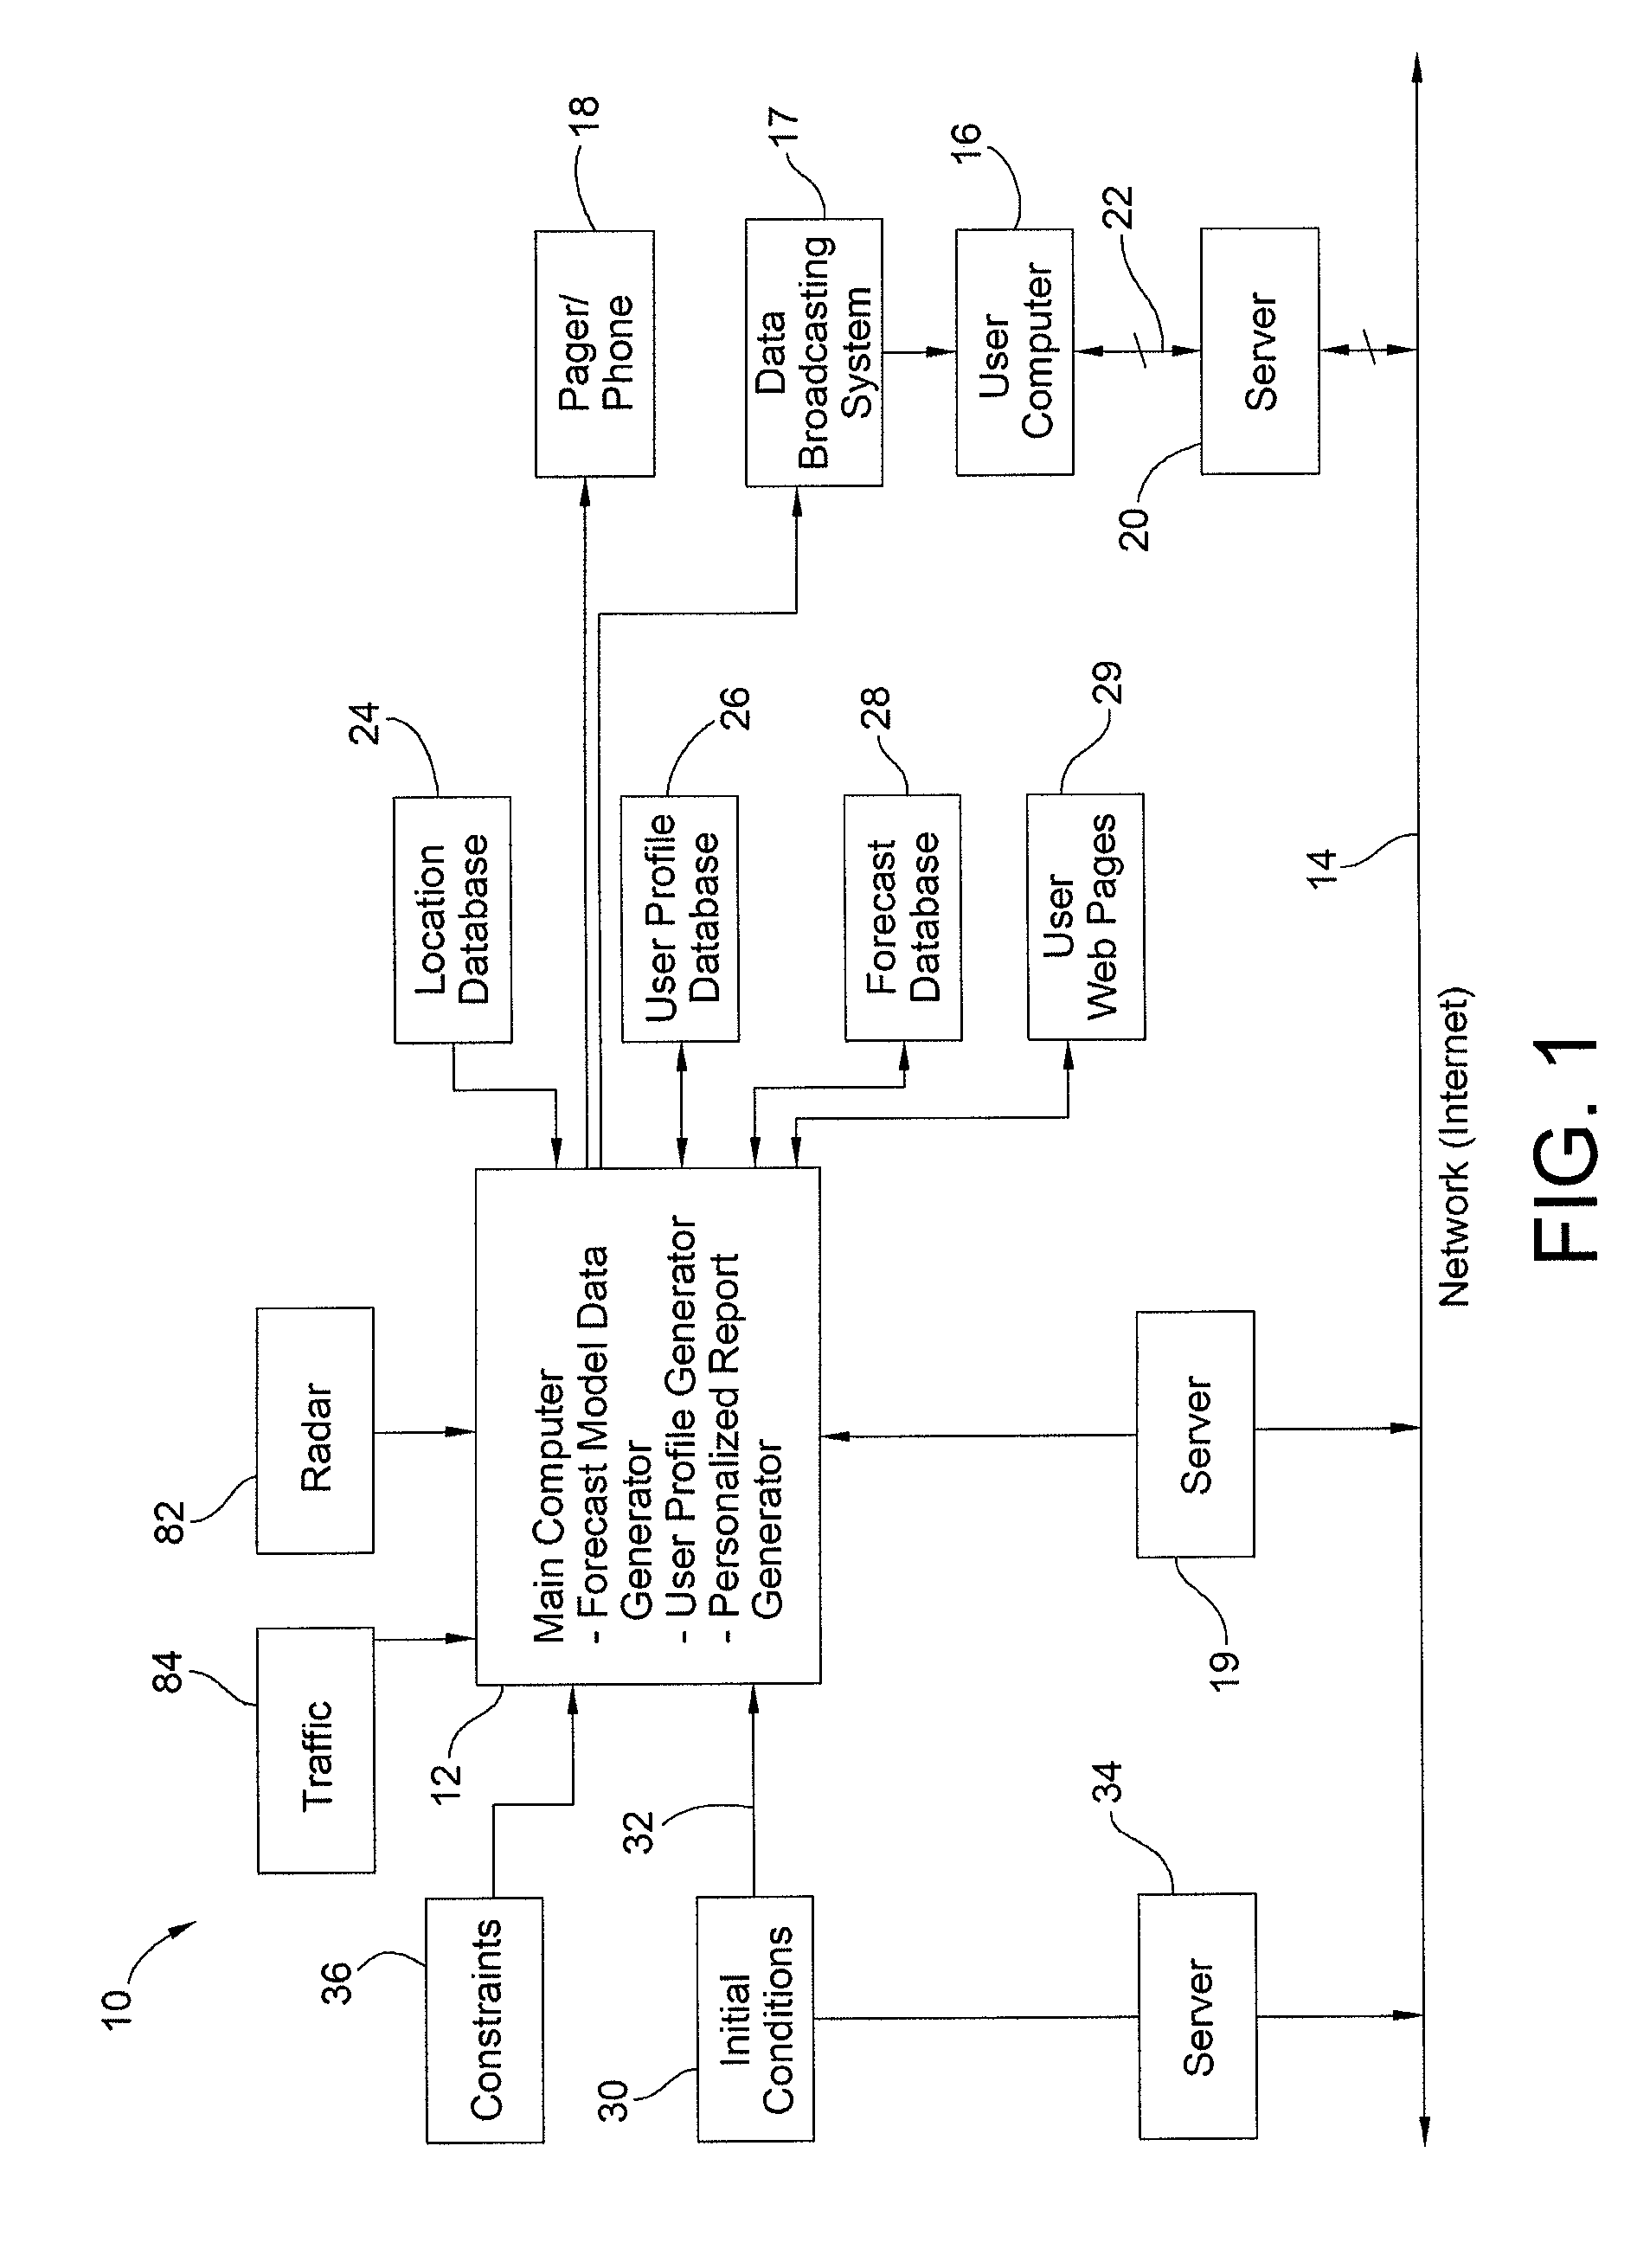 System and method for presenting personalized weather information and the like